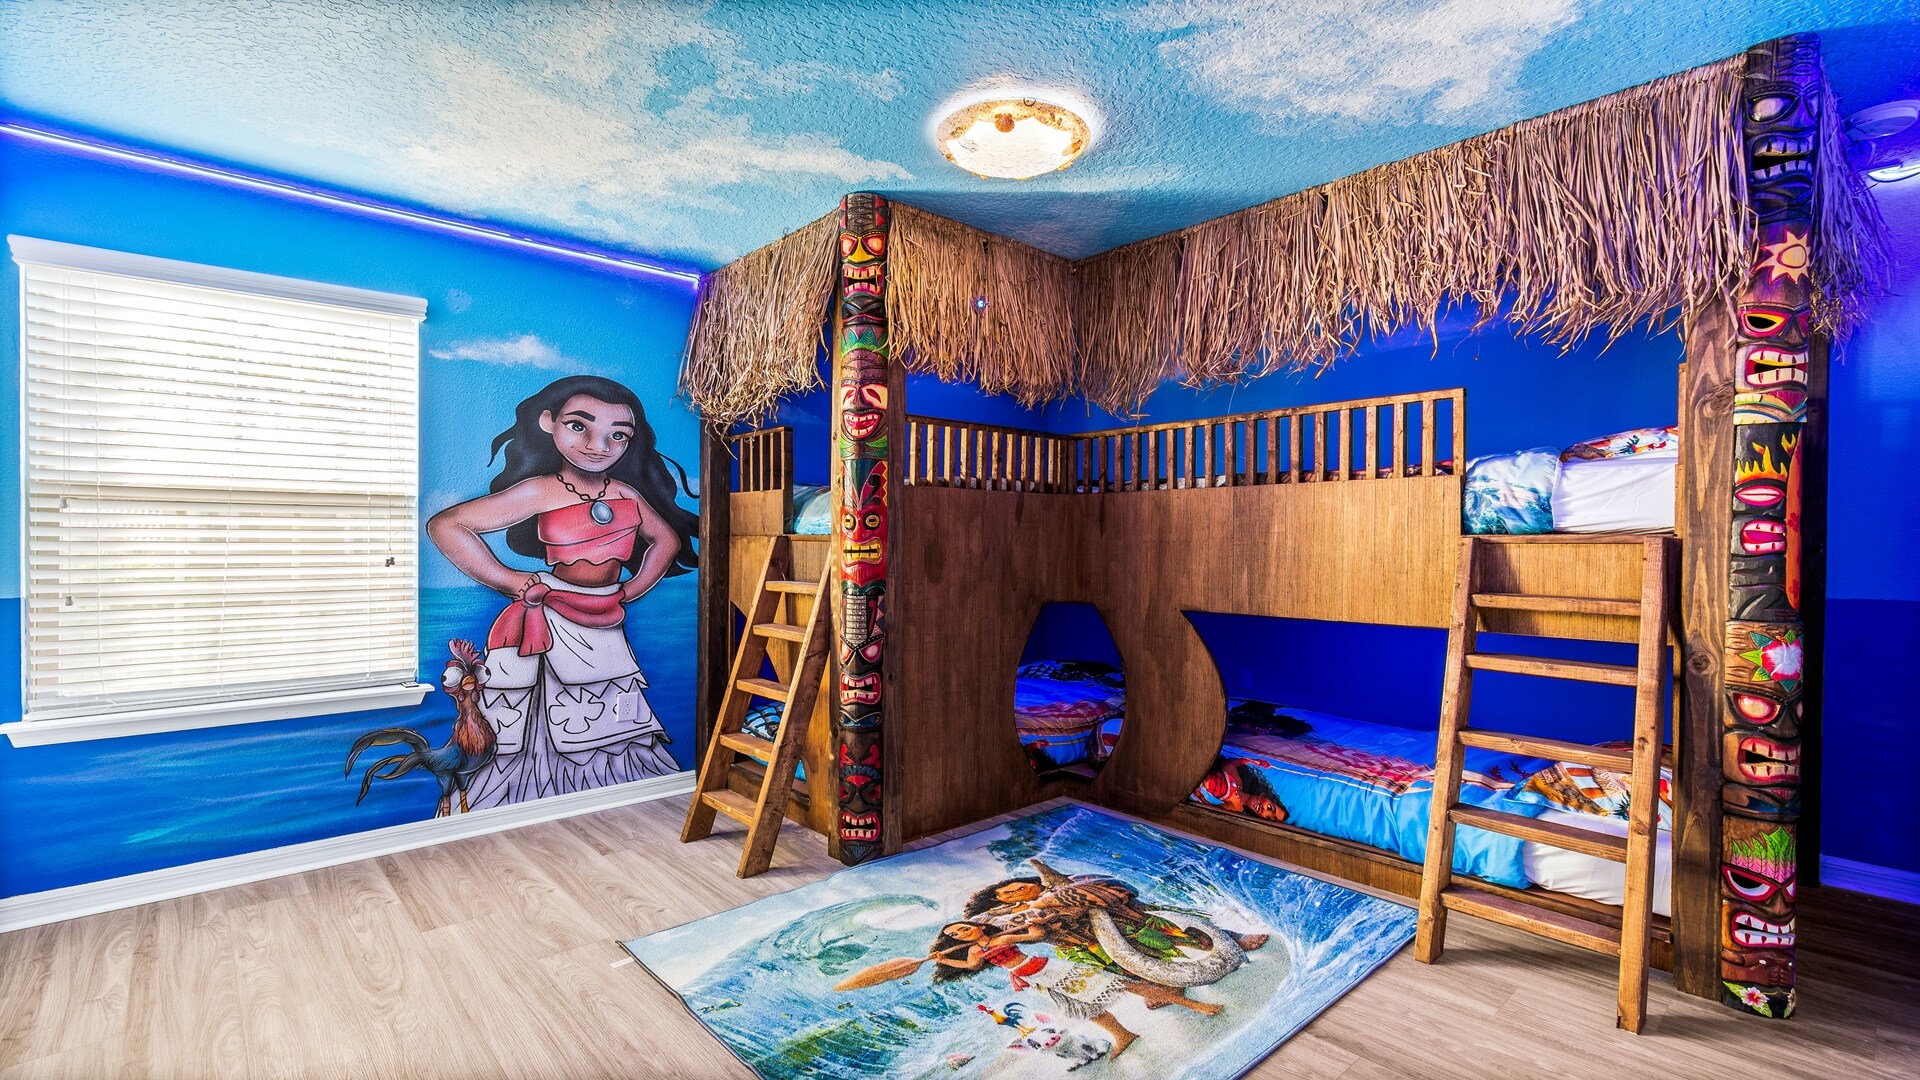 Moana's world with a fun bunk bed, creating an adventurous and delightful space designed especially for kids.